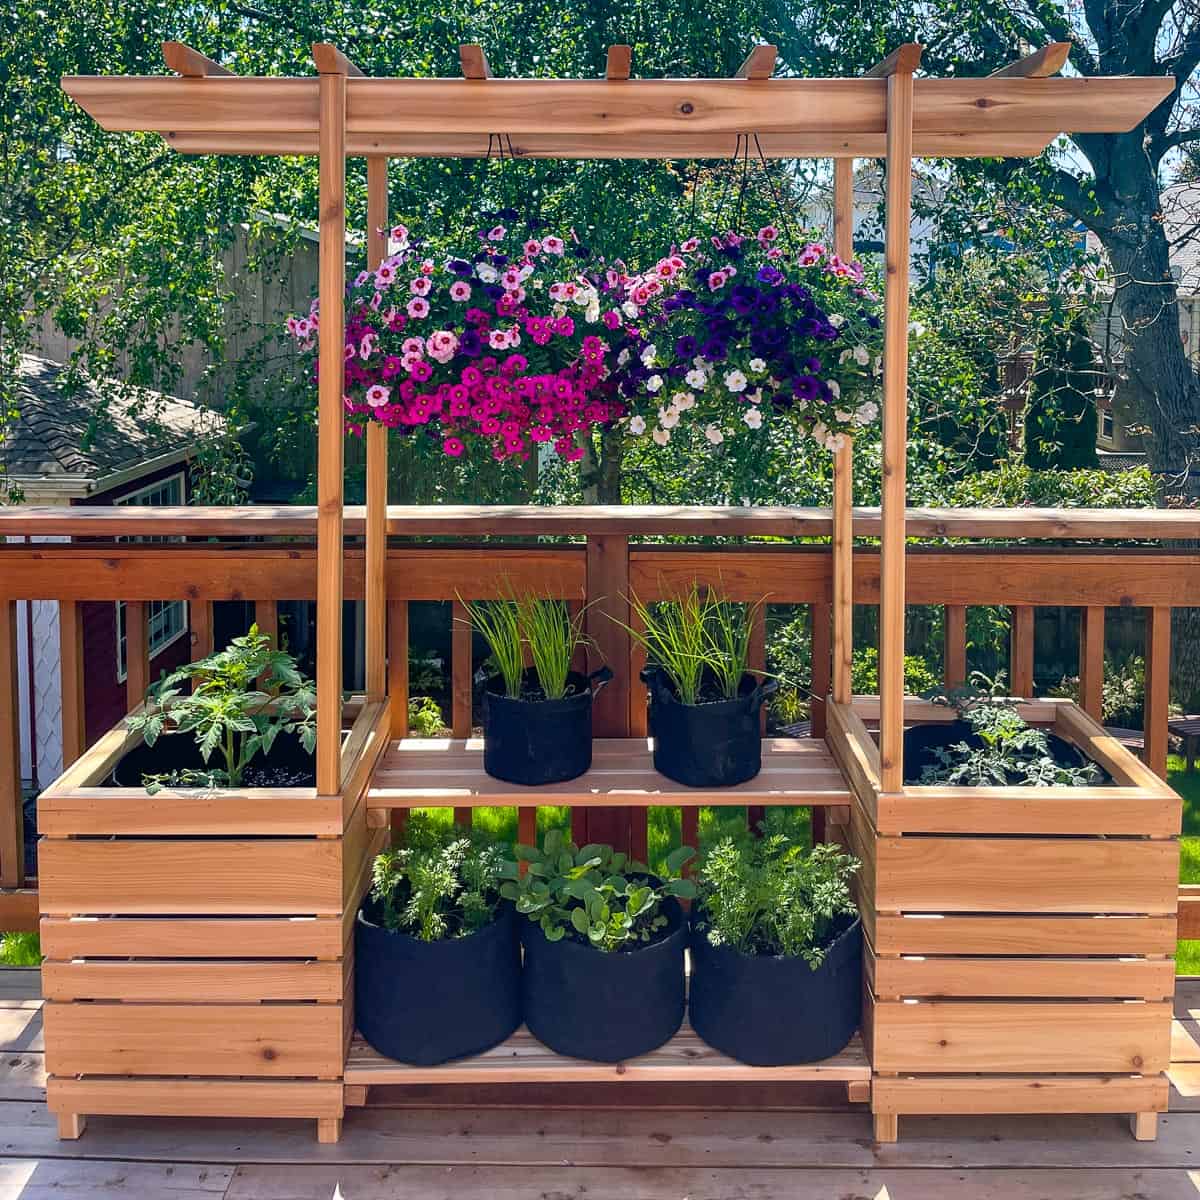 HOW TO BUILD SIMPLE DIY RAISED GARDEN BEDS - The Handyman's Daughter